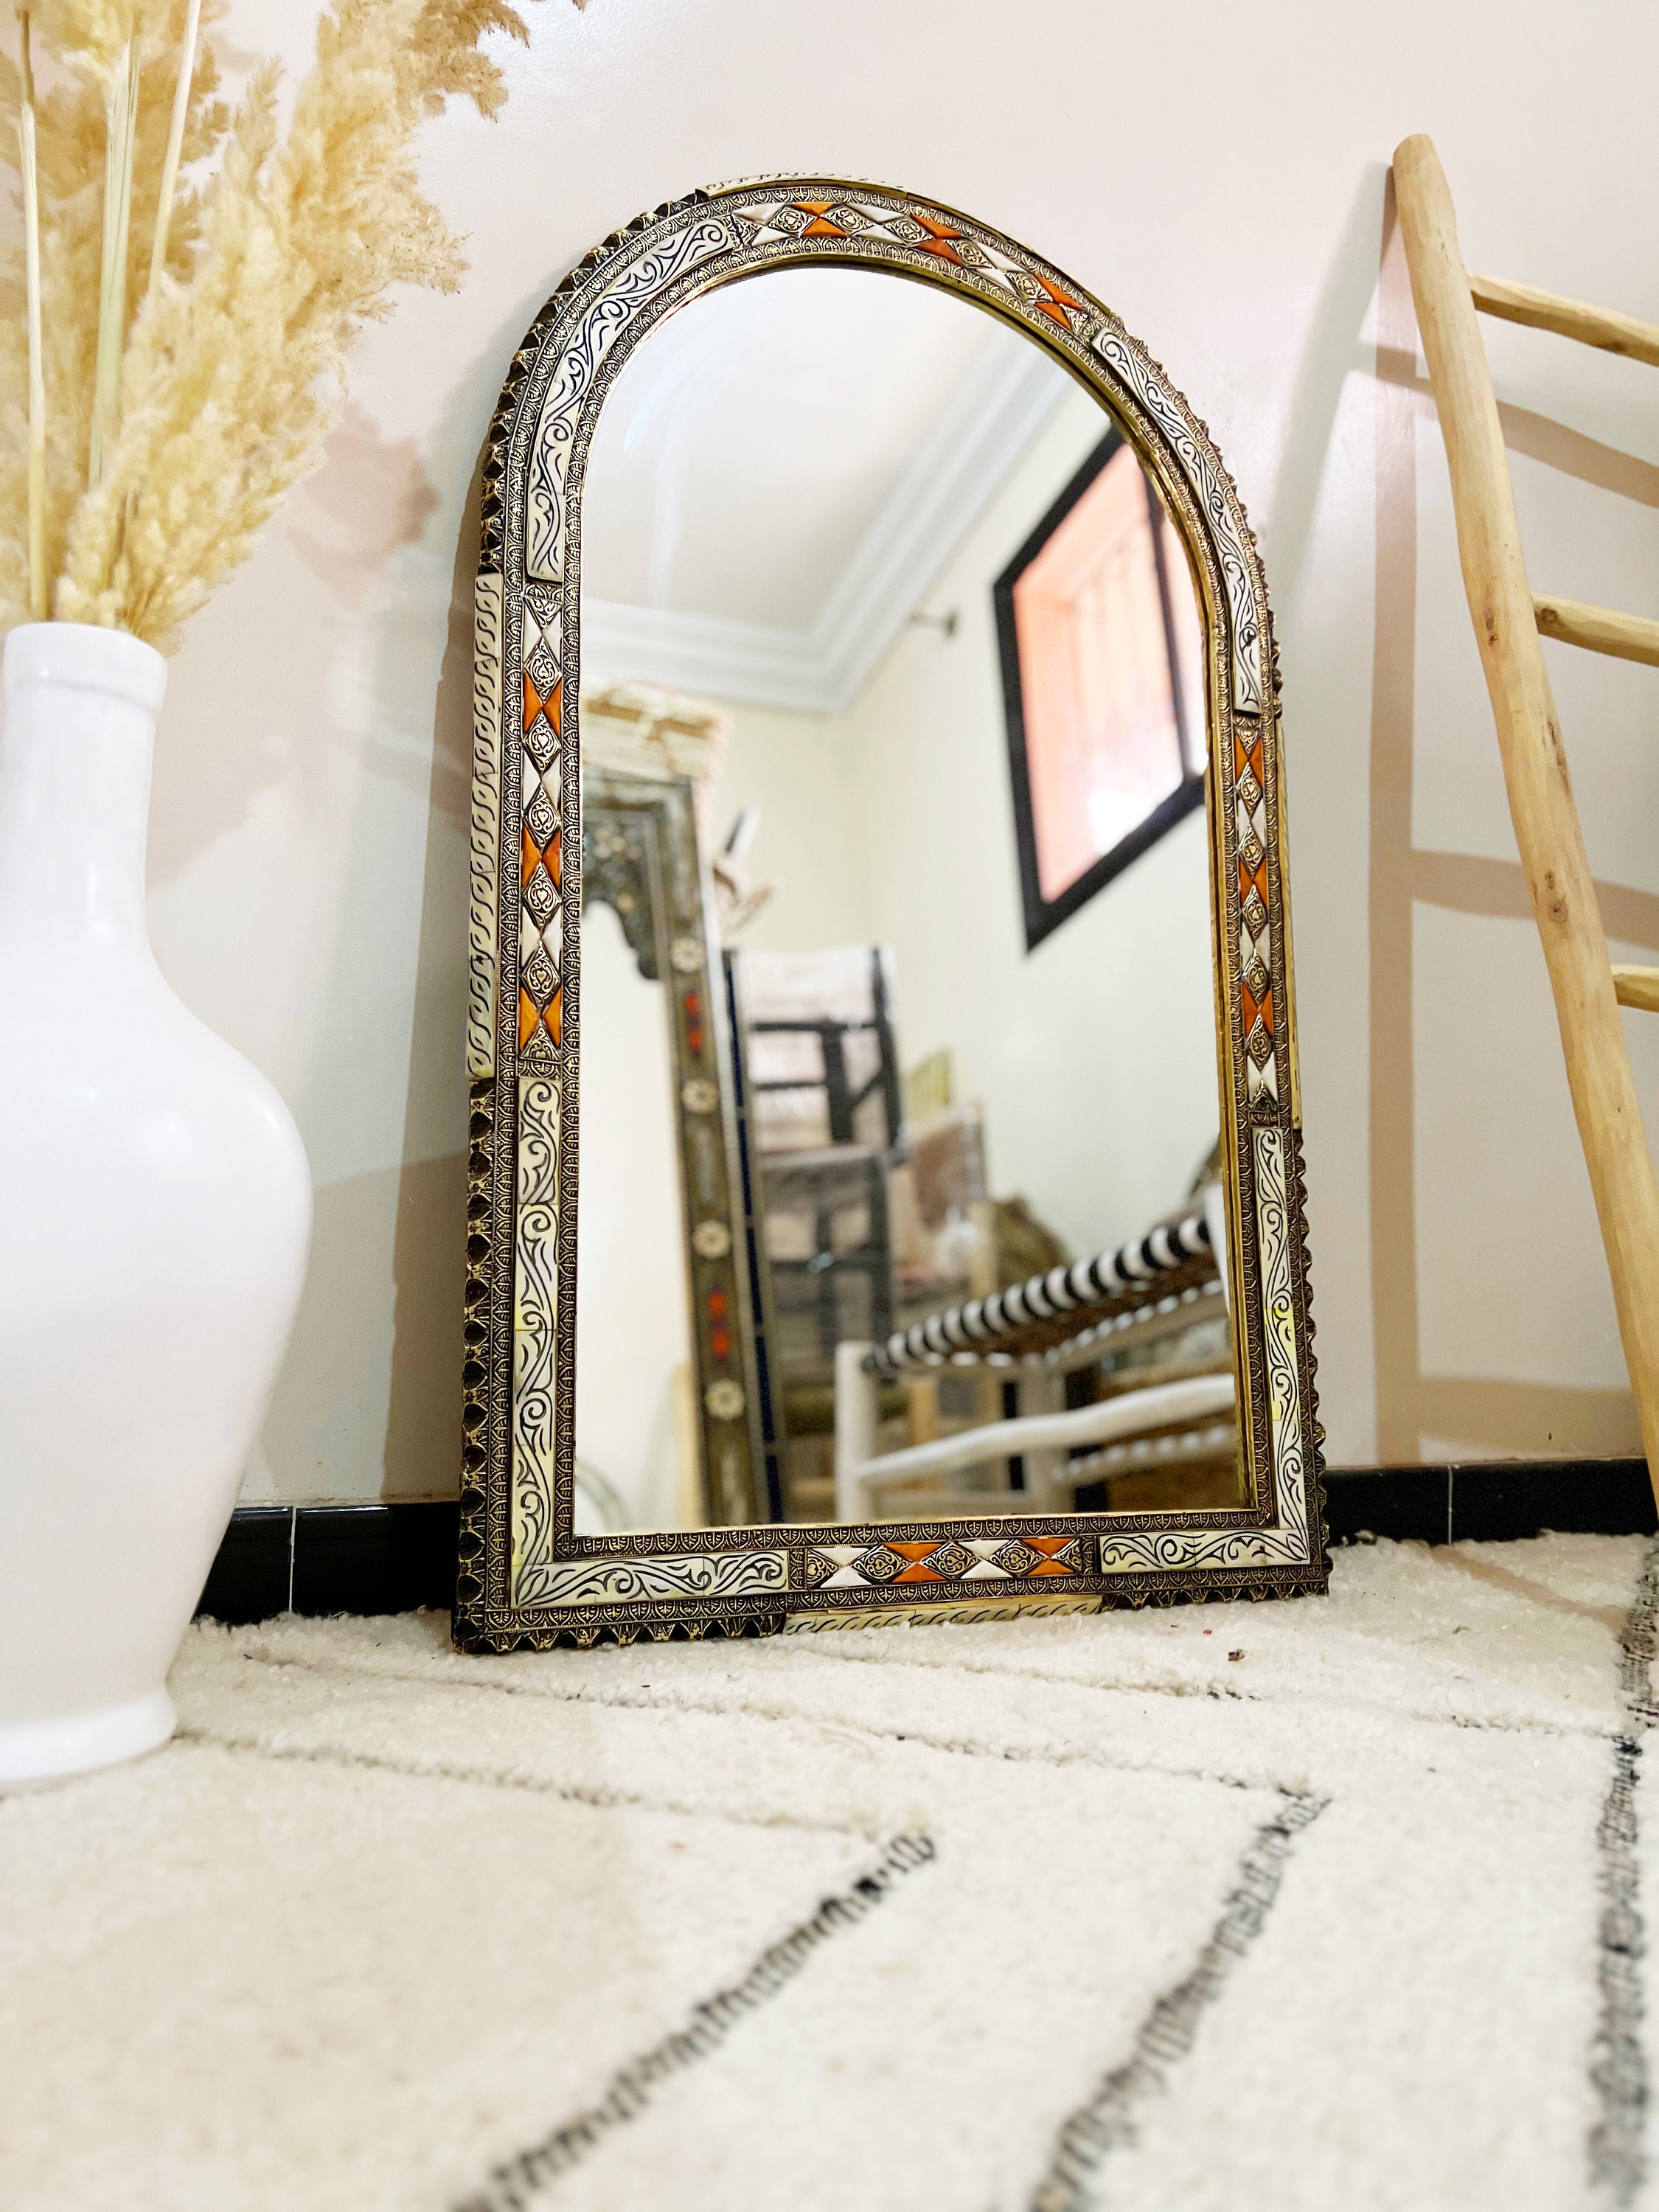 Craft Mirrors & Embroidery Mirrors Online at Wholesale Prices